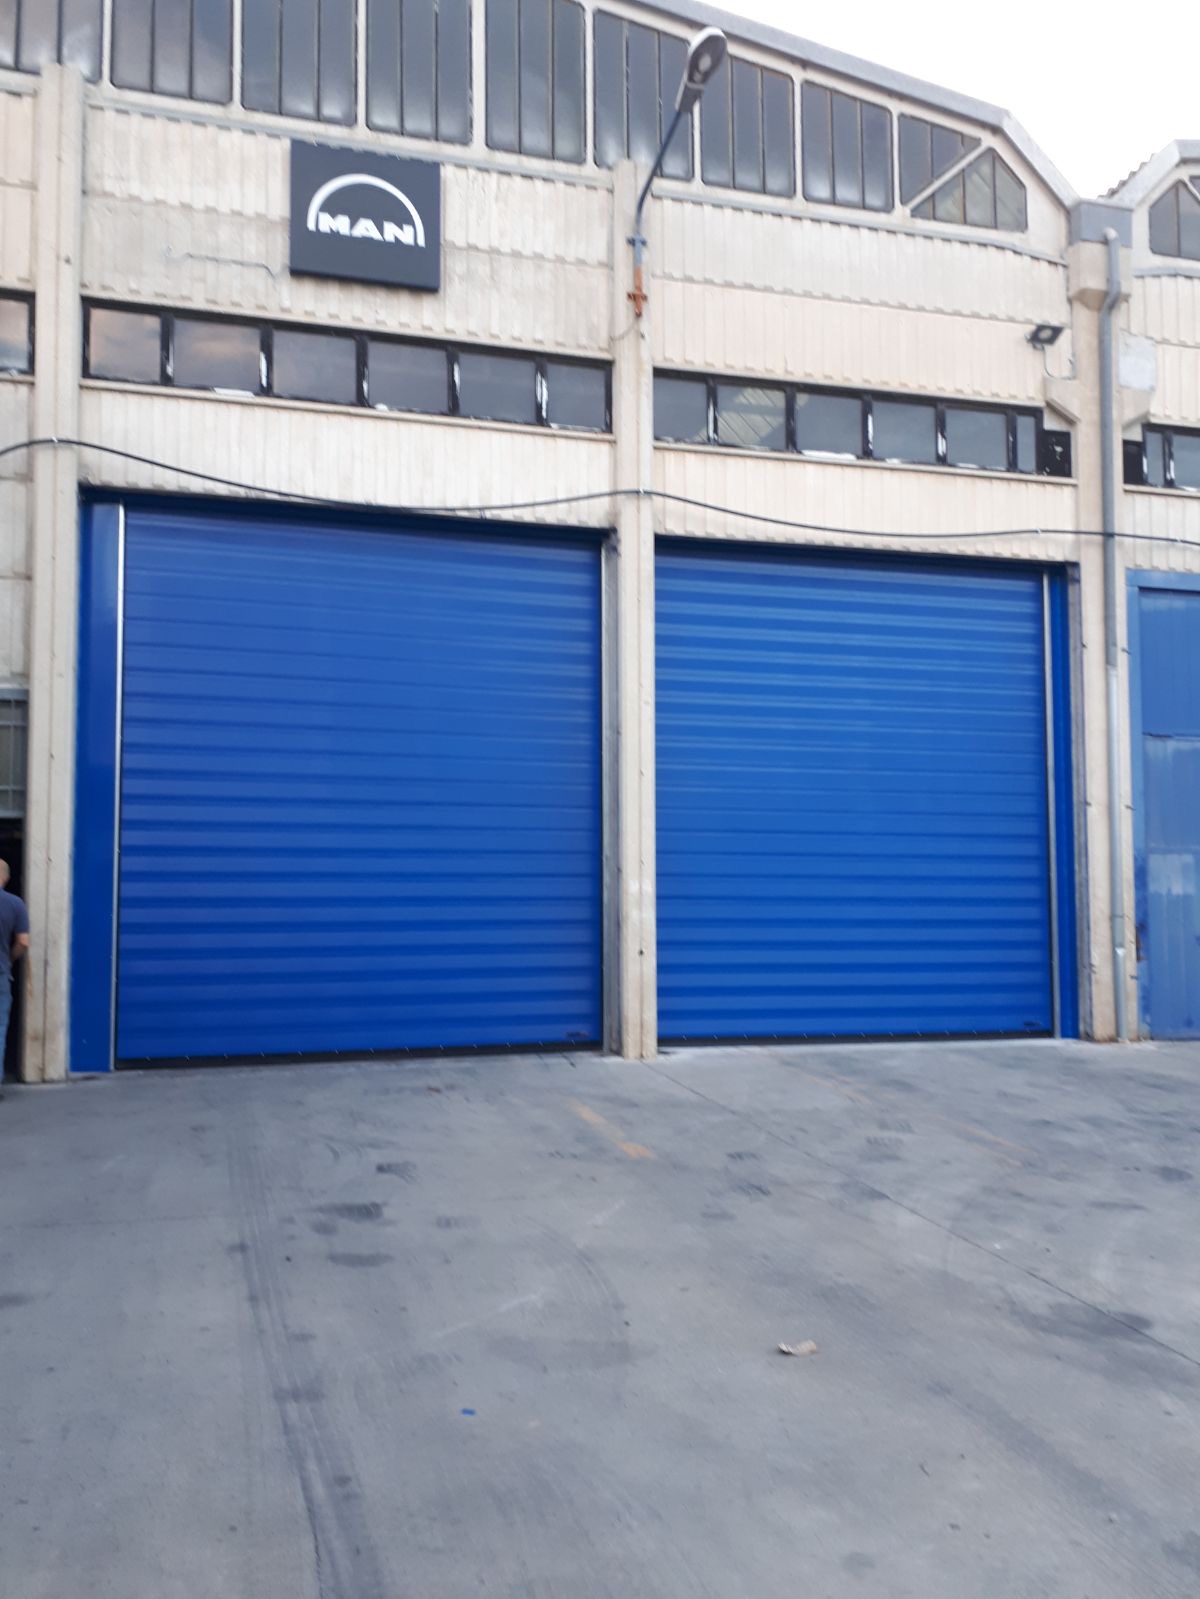 Features of Our Bi-Parting Rapid Roll Doors